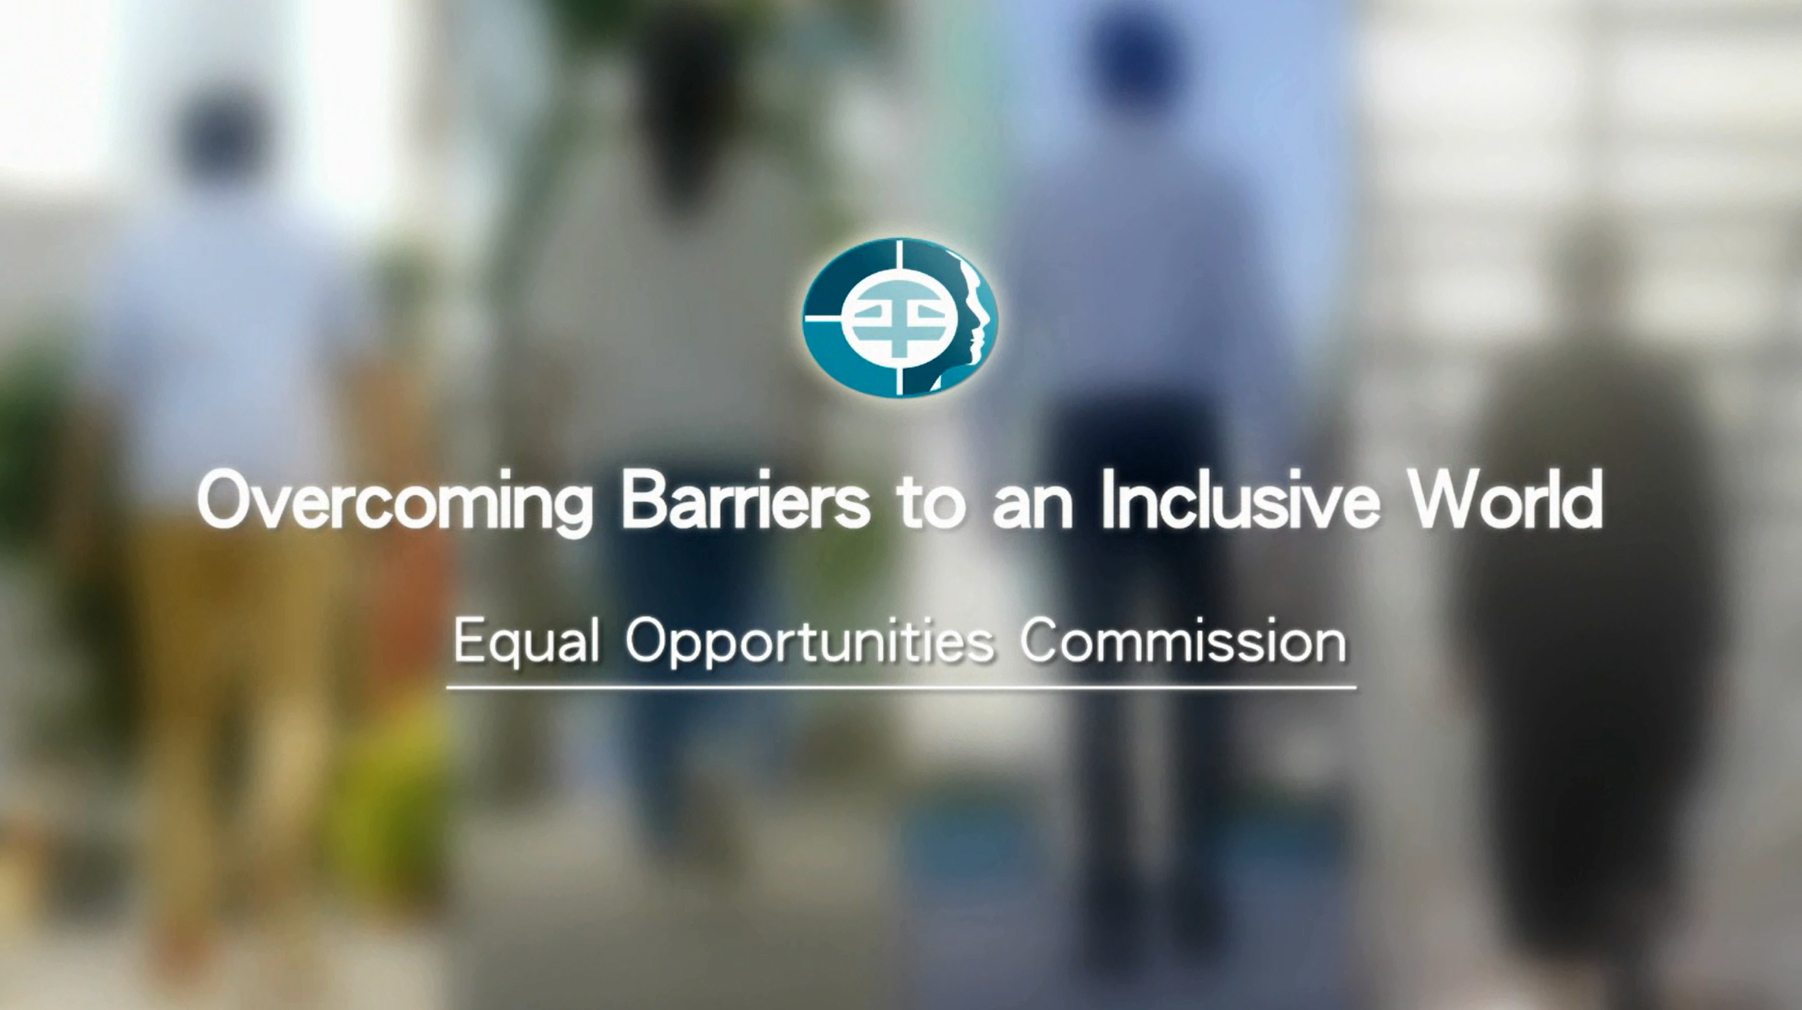 Corporate Video of the Equal Opportunities Commission - Overcoming Barriers to an Inclusive World